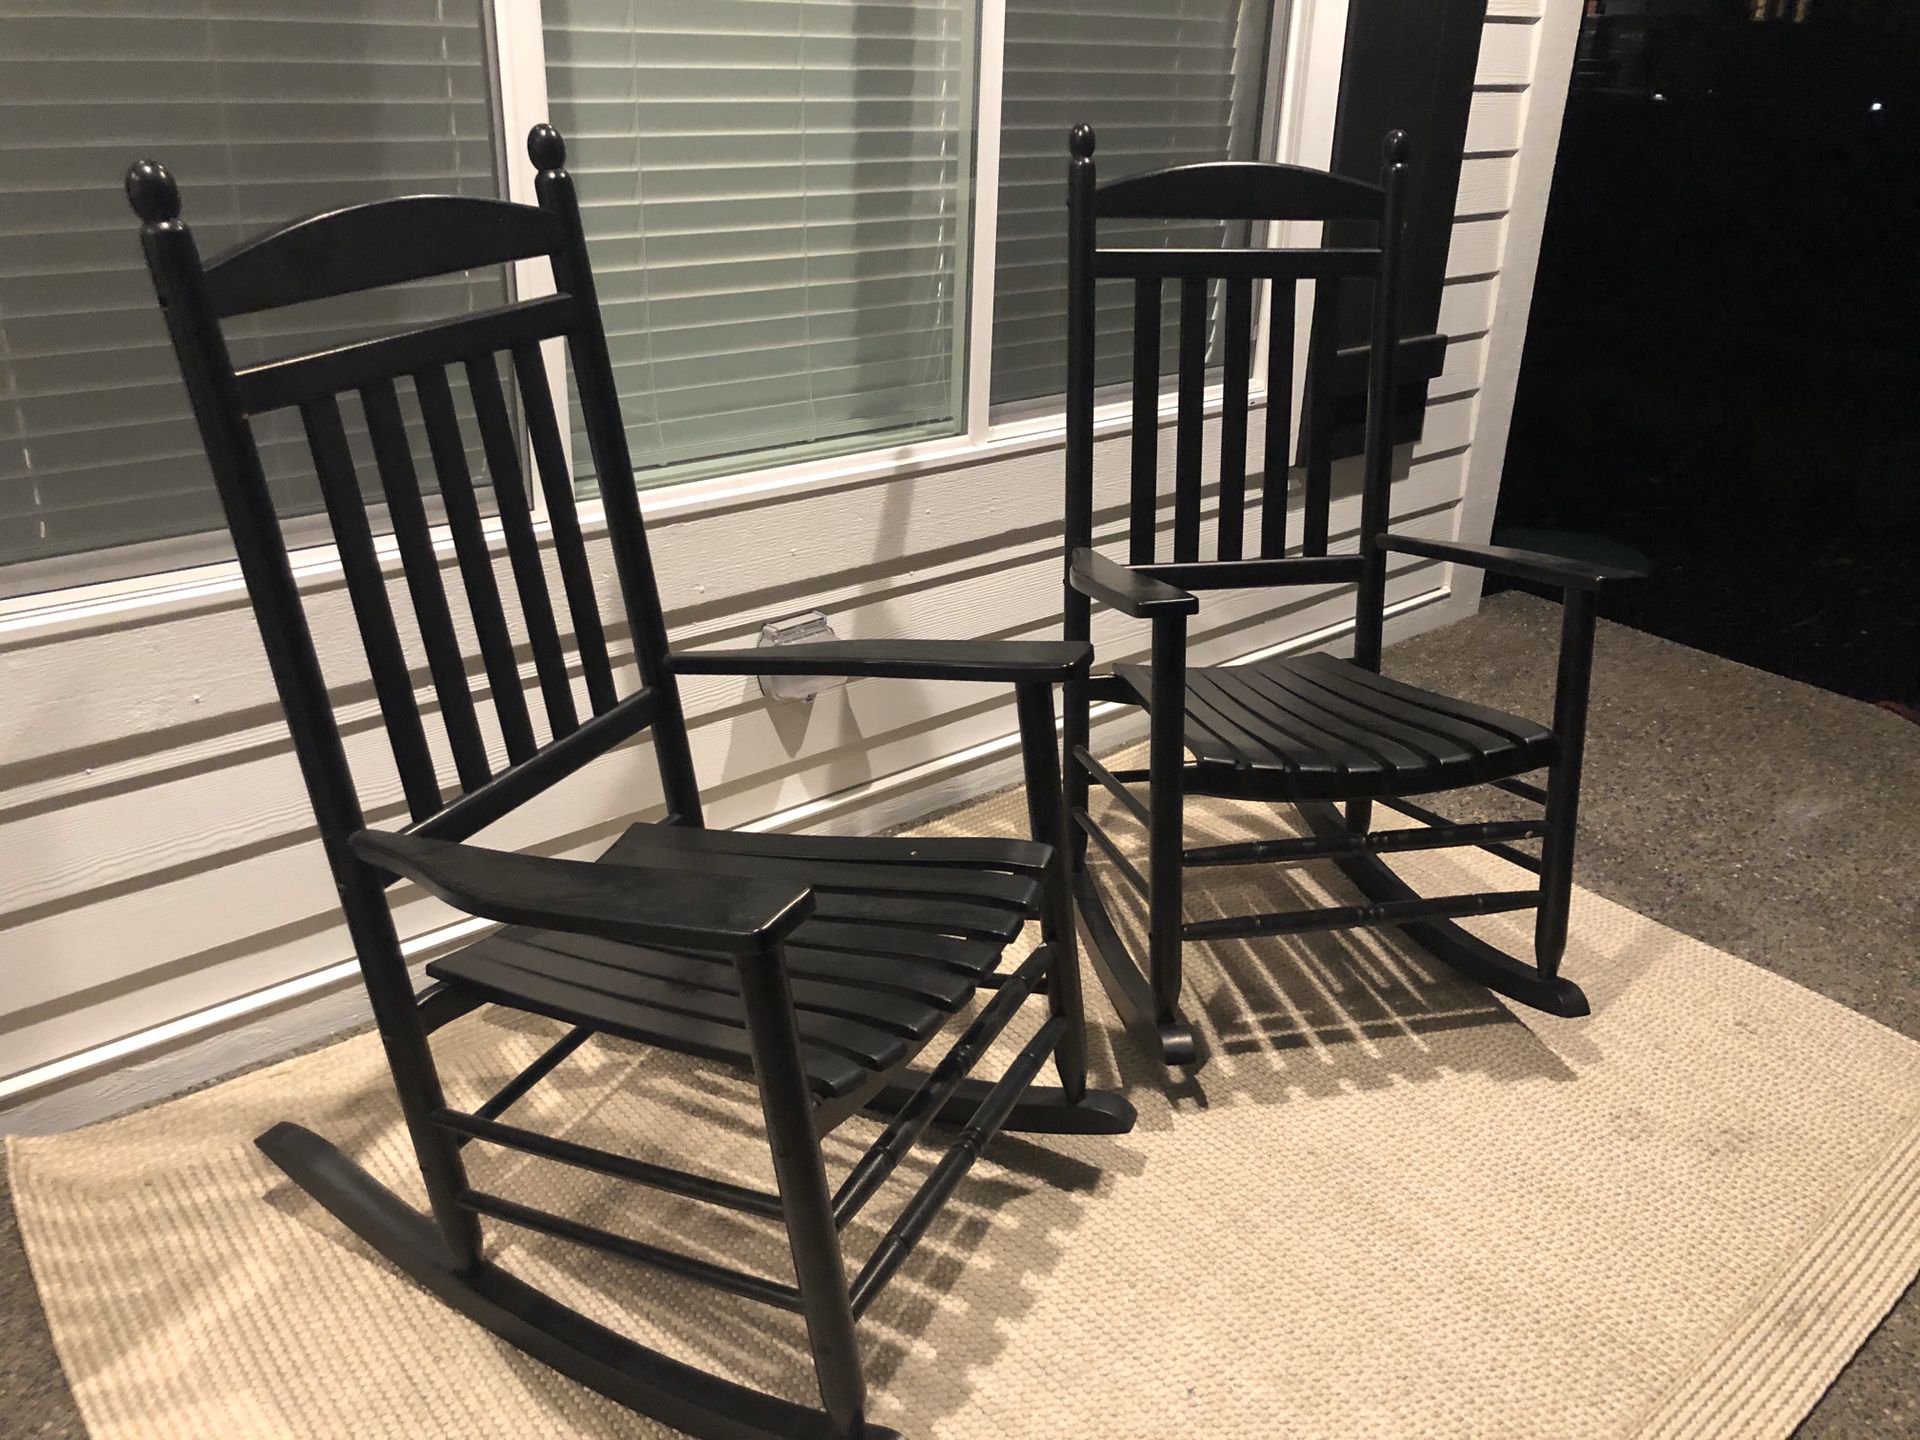 2 Wooden Rocking Chairs